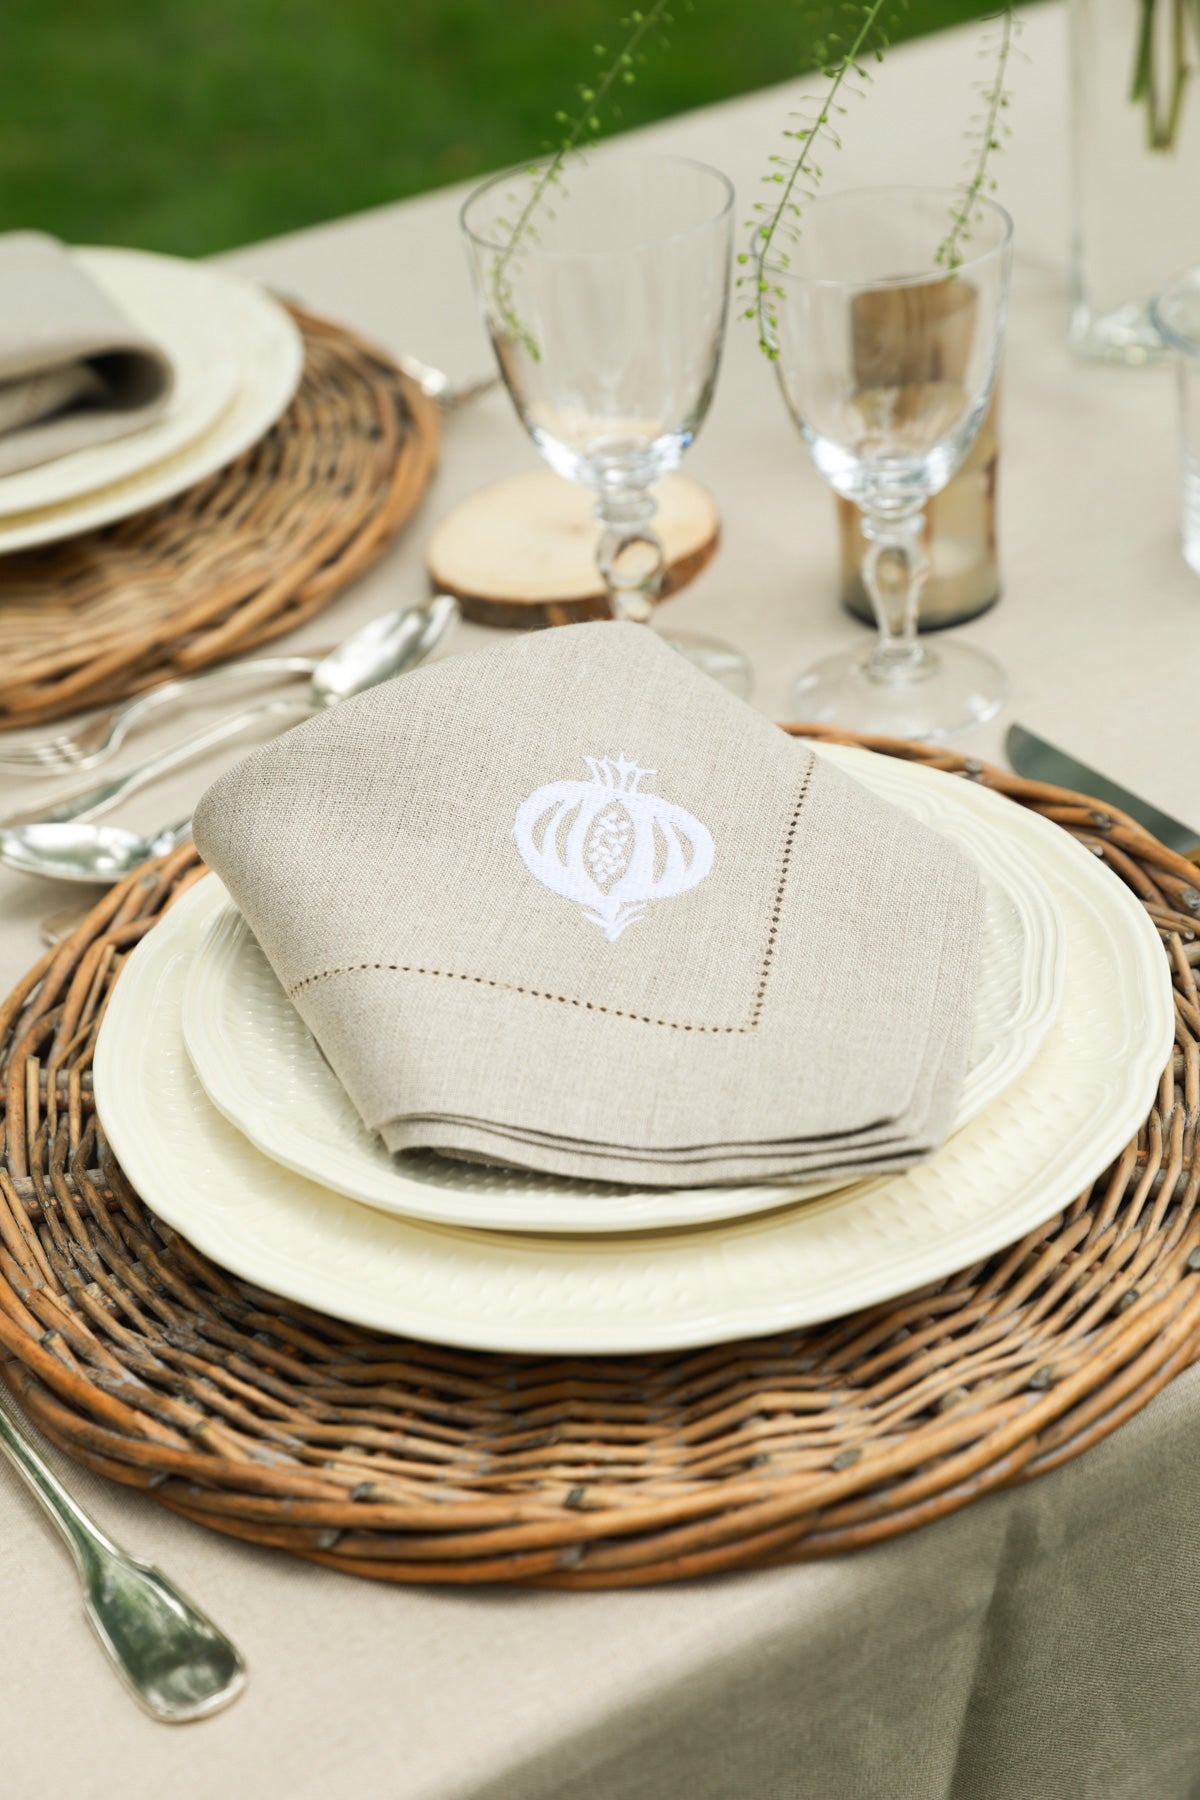 GRANADA Pure Linen Dining Set (For 4) - Natural & White